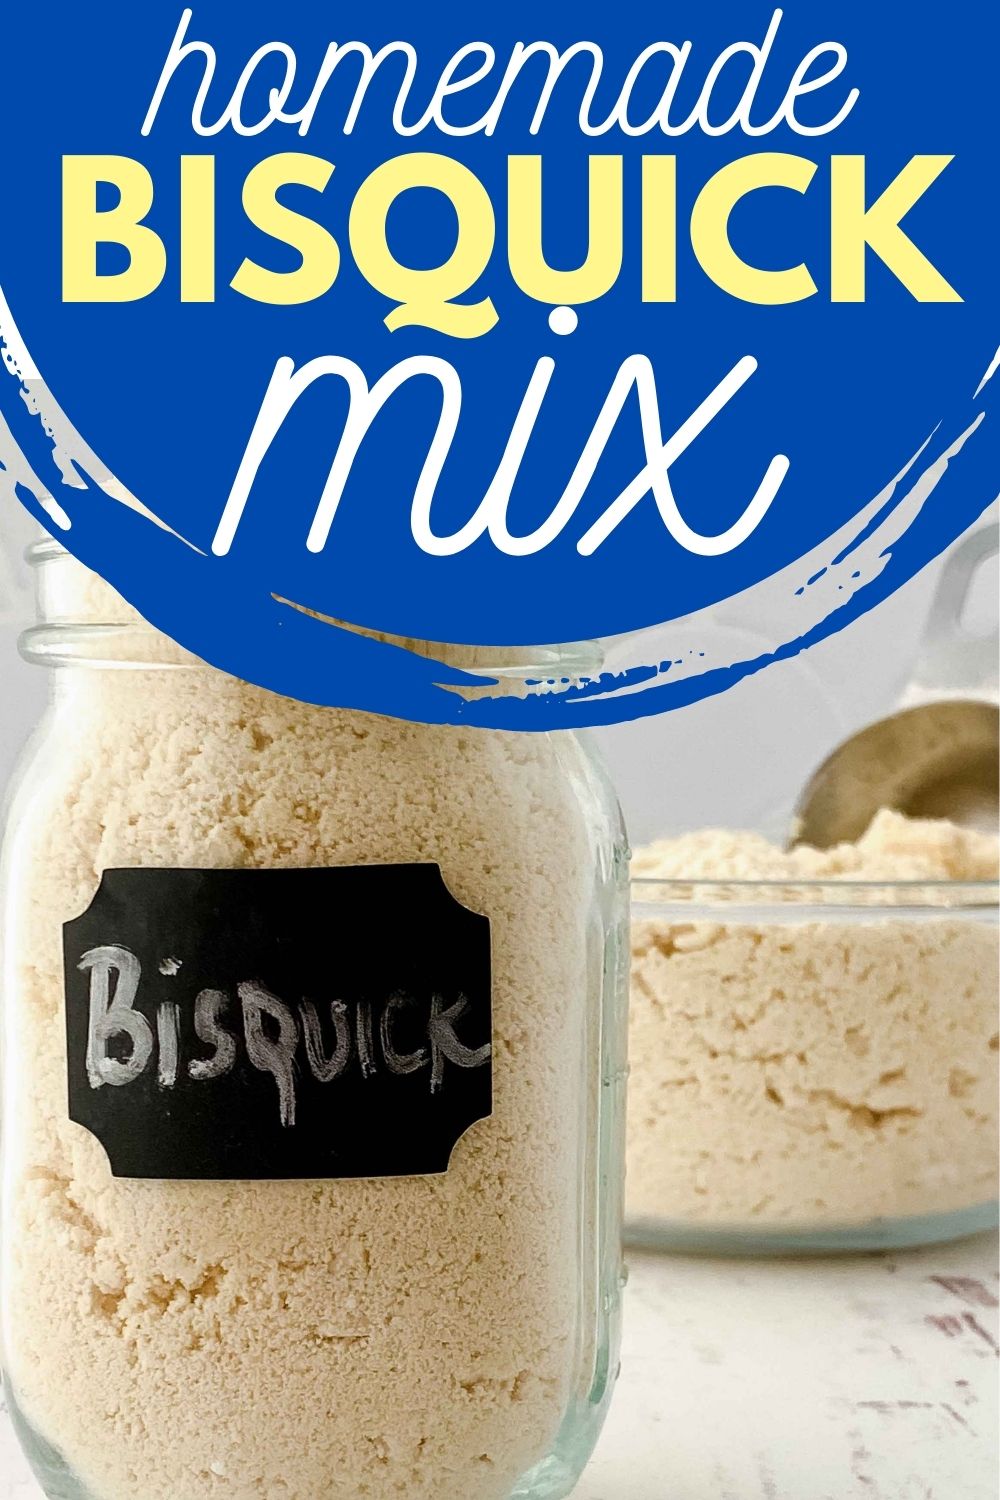 Pin image: top says "Homemade Bisquick mix" and bottom has a pic of a jar with homemade Bisquick mix.